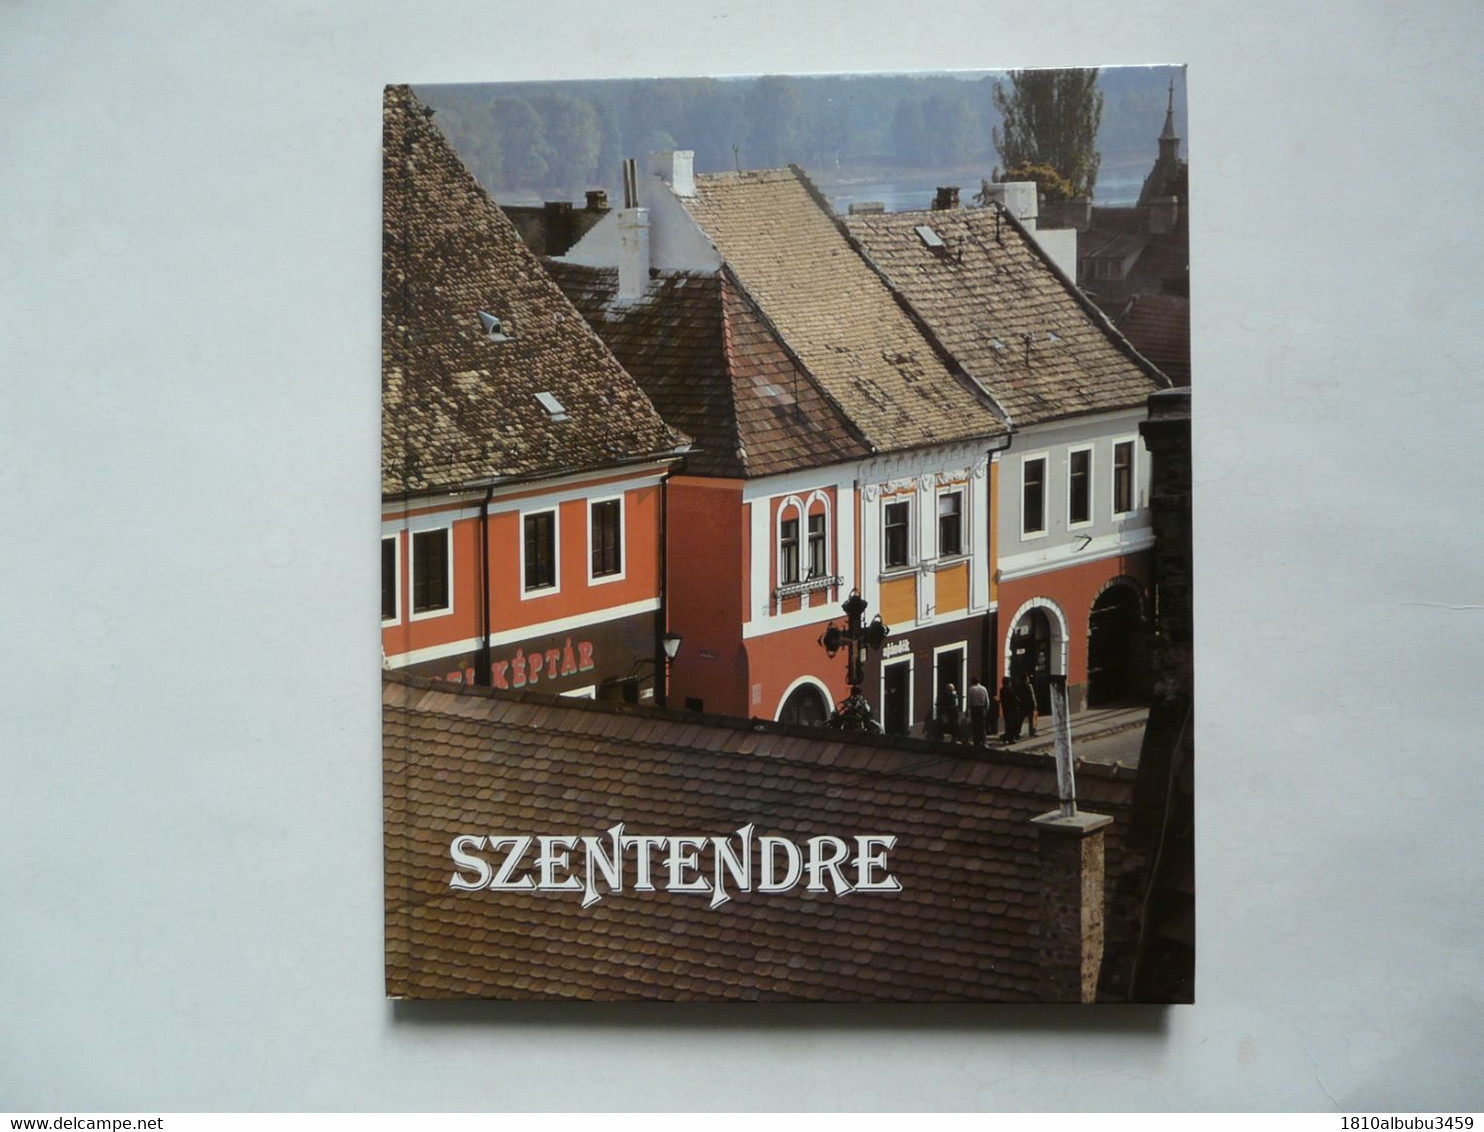 SZENTENDRE With 101 Colour Photographs By Gyula TAHIN - Cultural